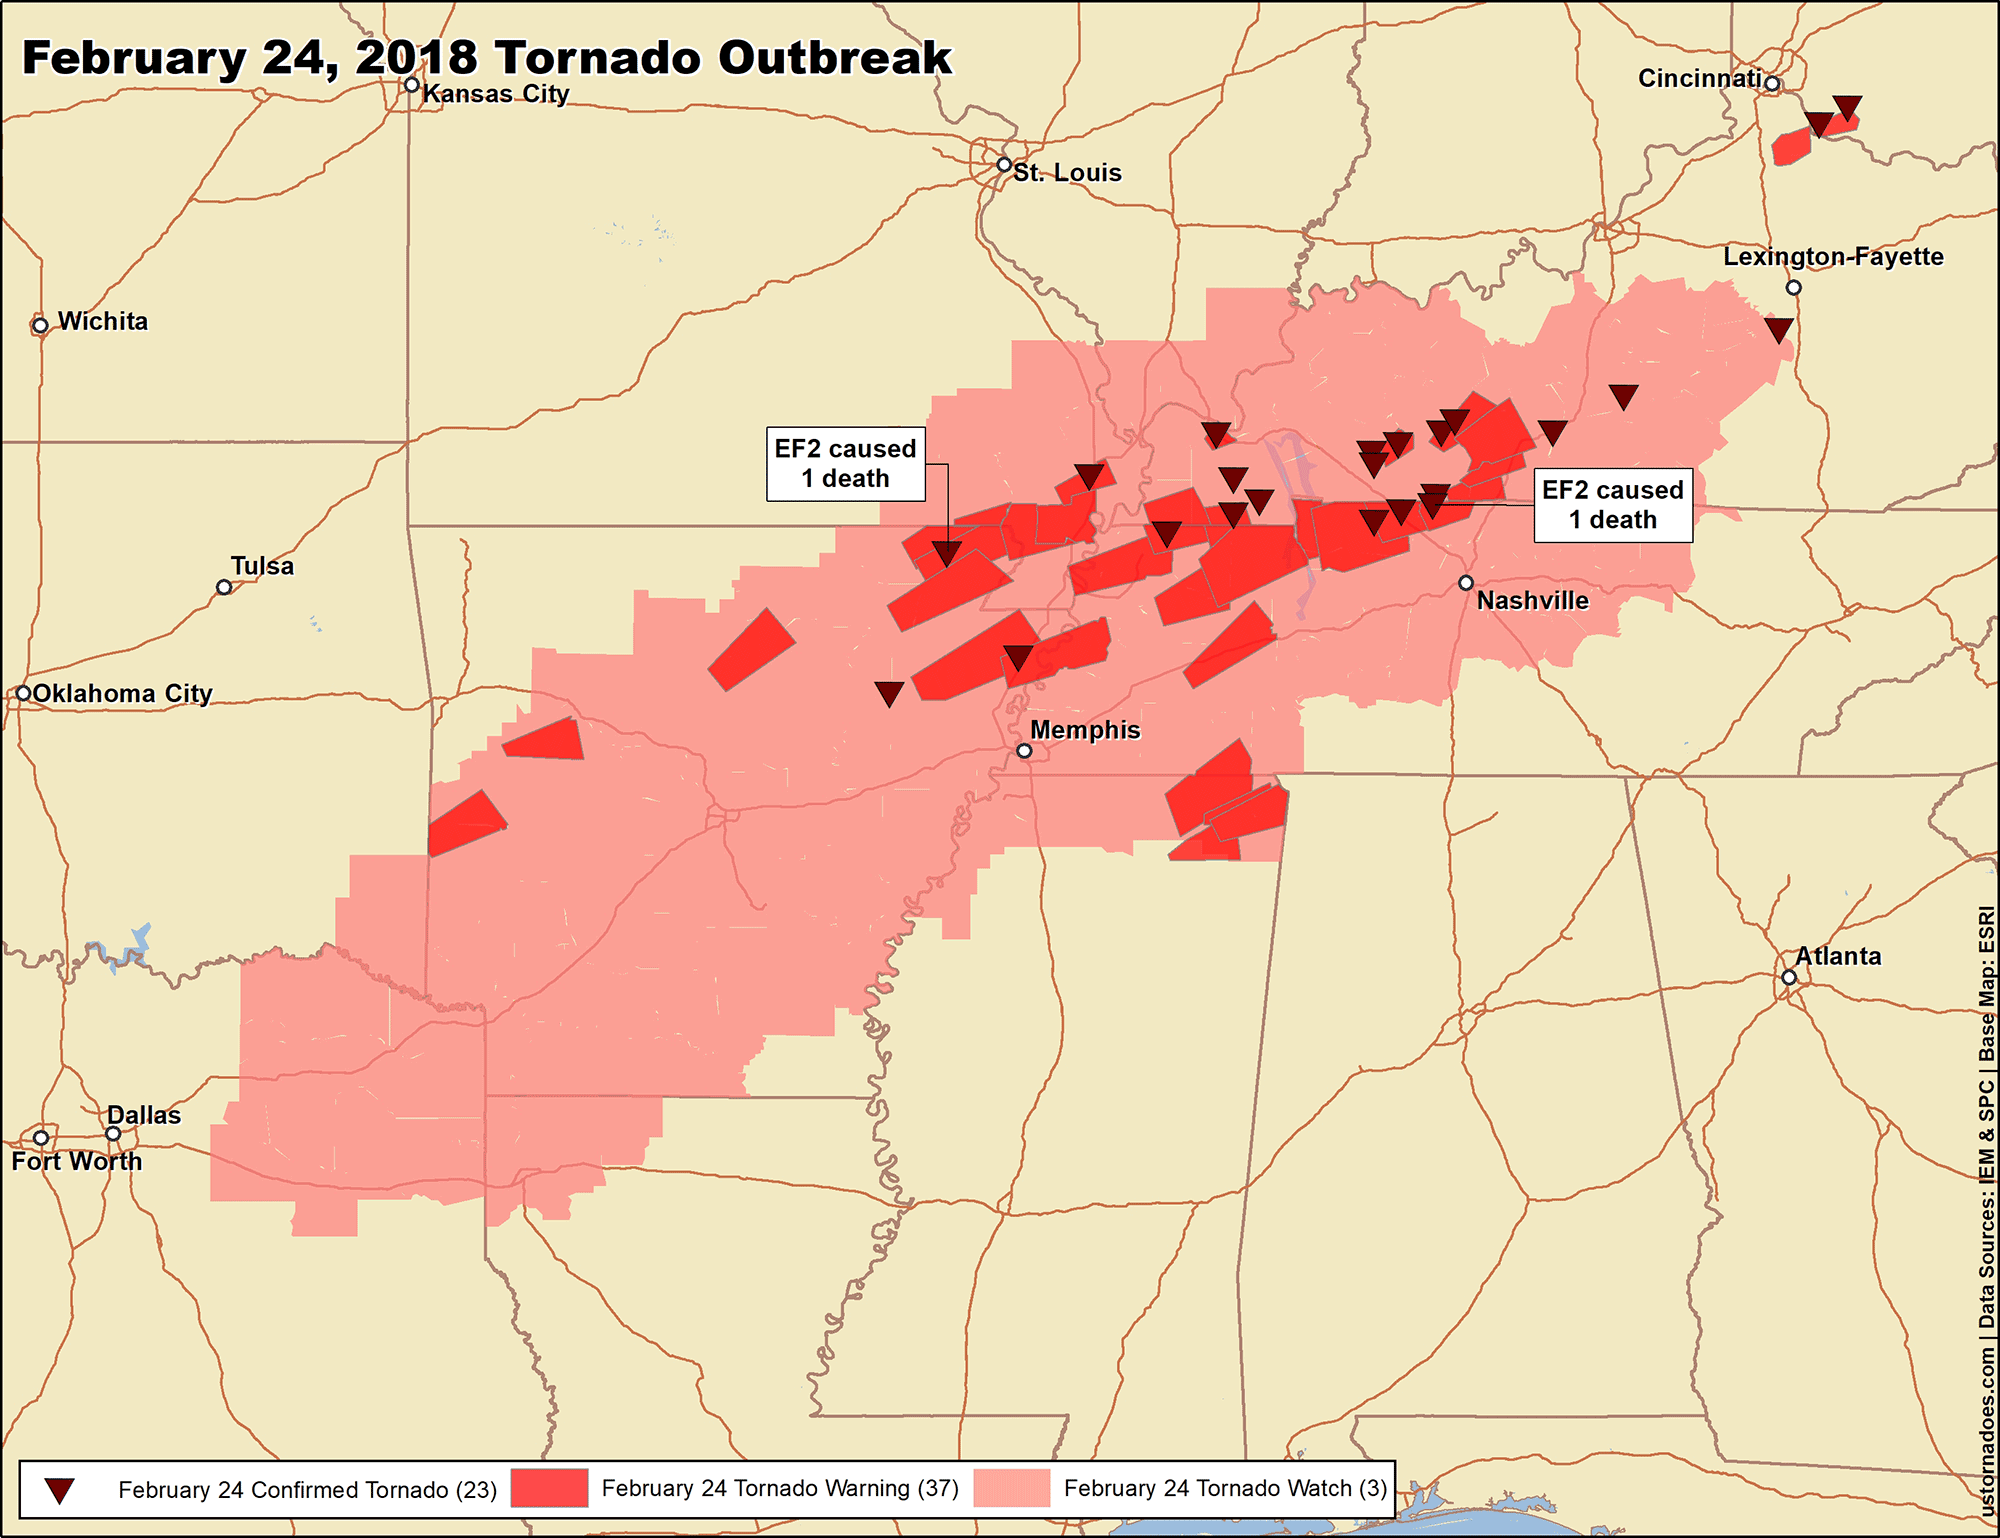 20180224-february24-outbreak.png